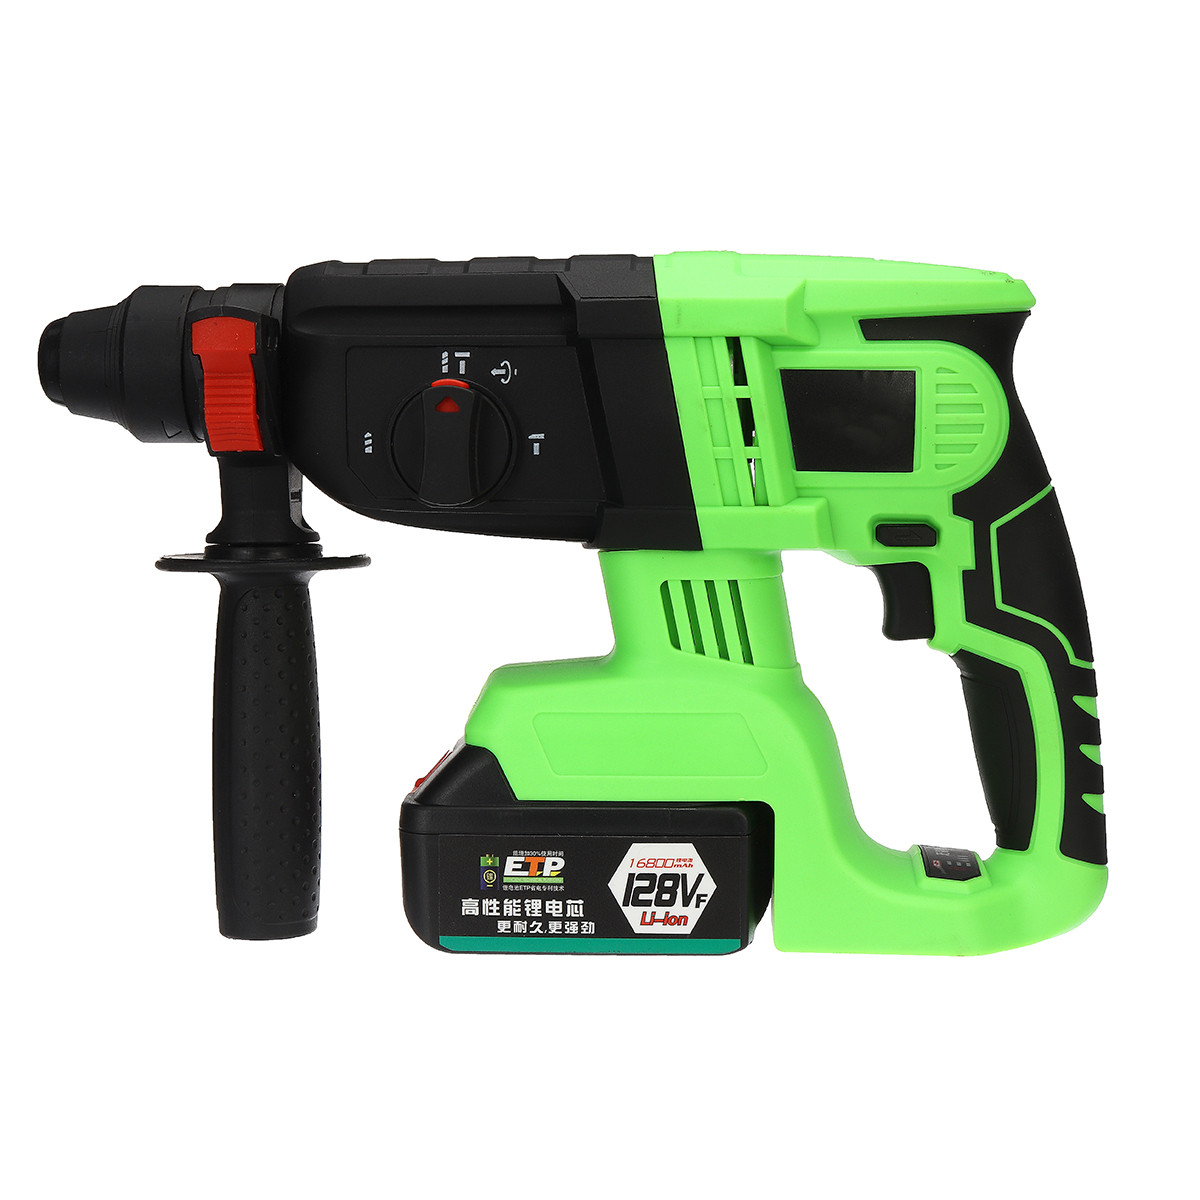 

128VF 16800mAh Brushless Electric Cordless Impact Hammer High Torque Drill with Rechargeable Battery